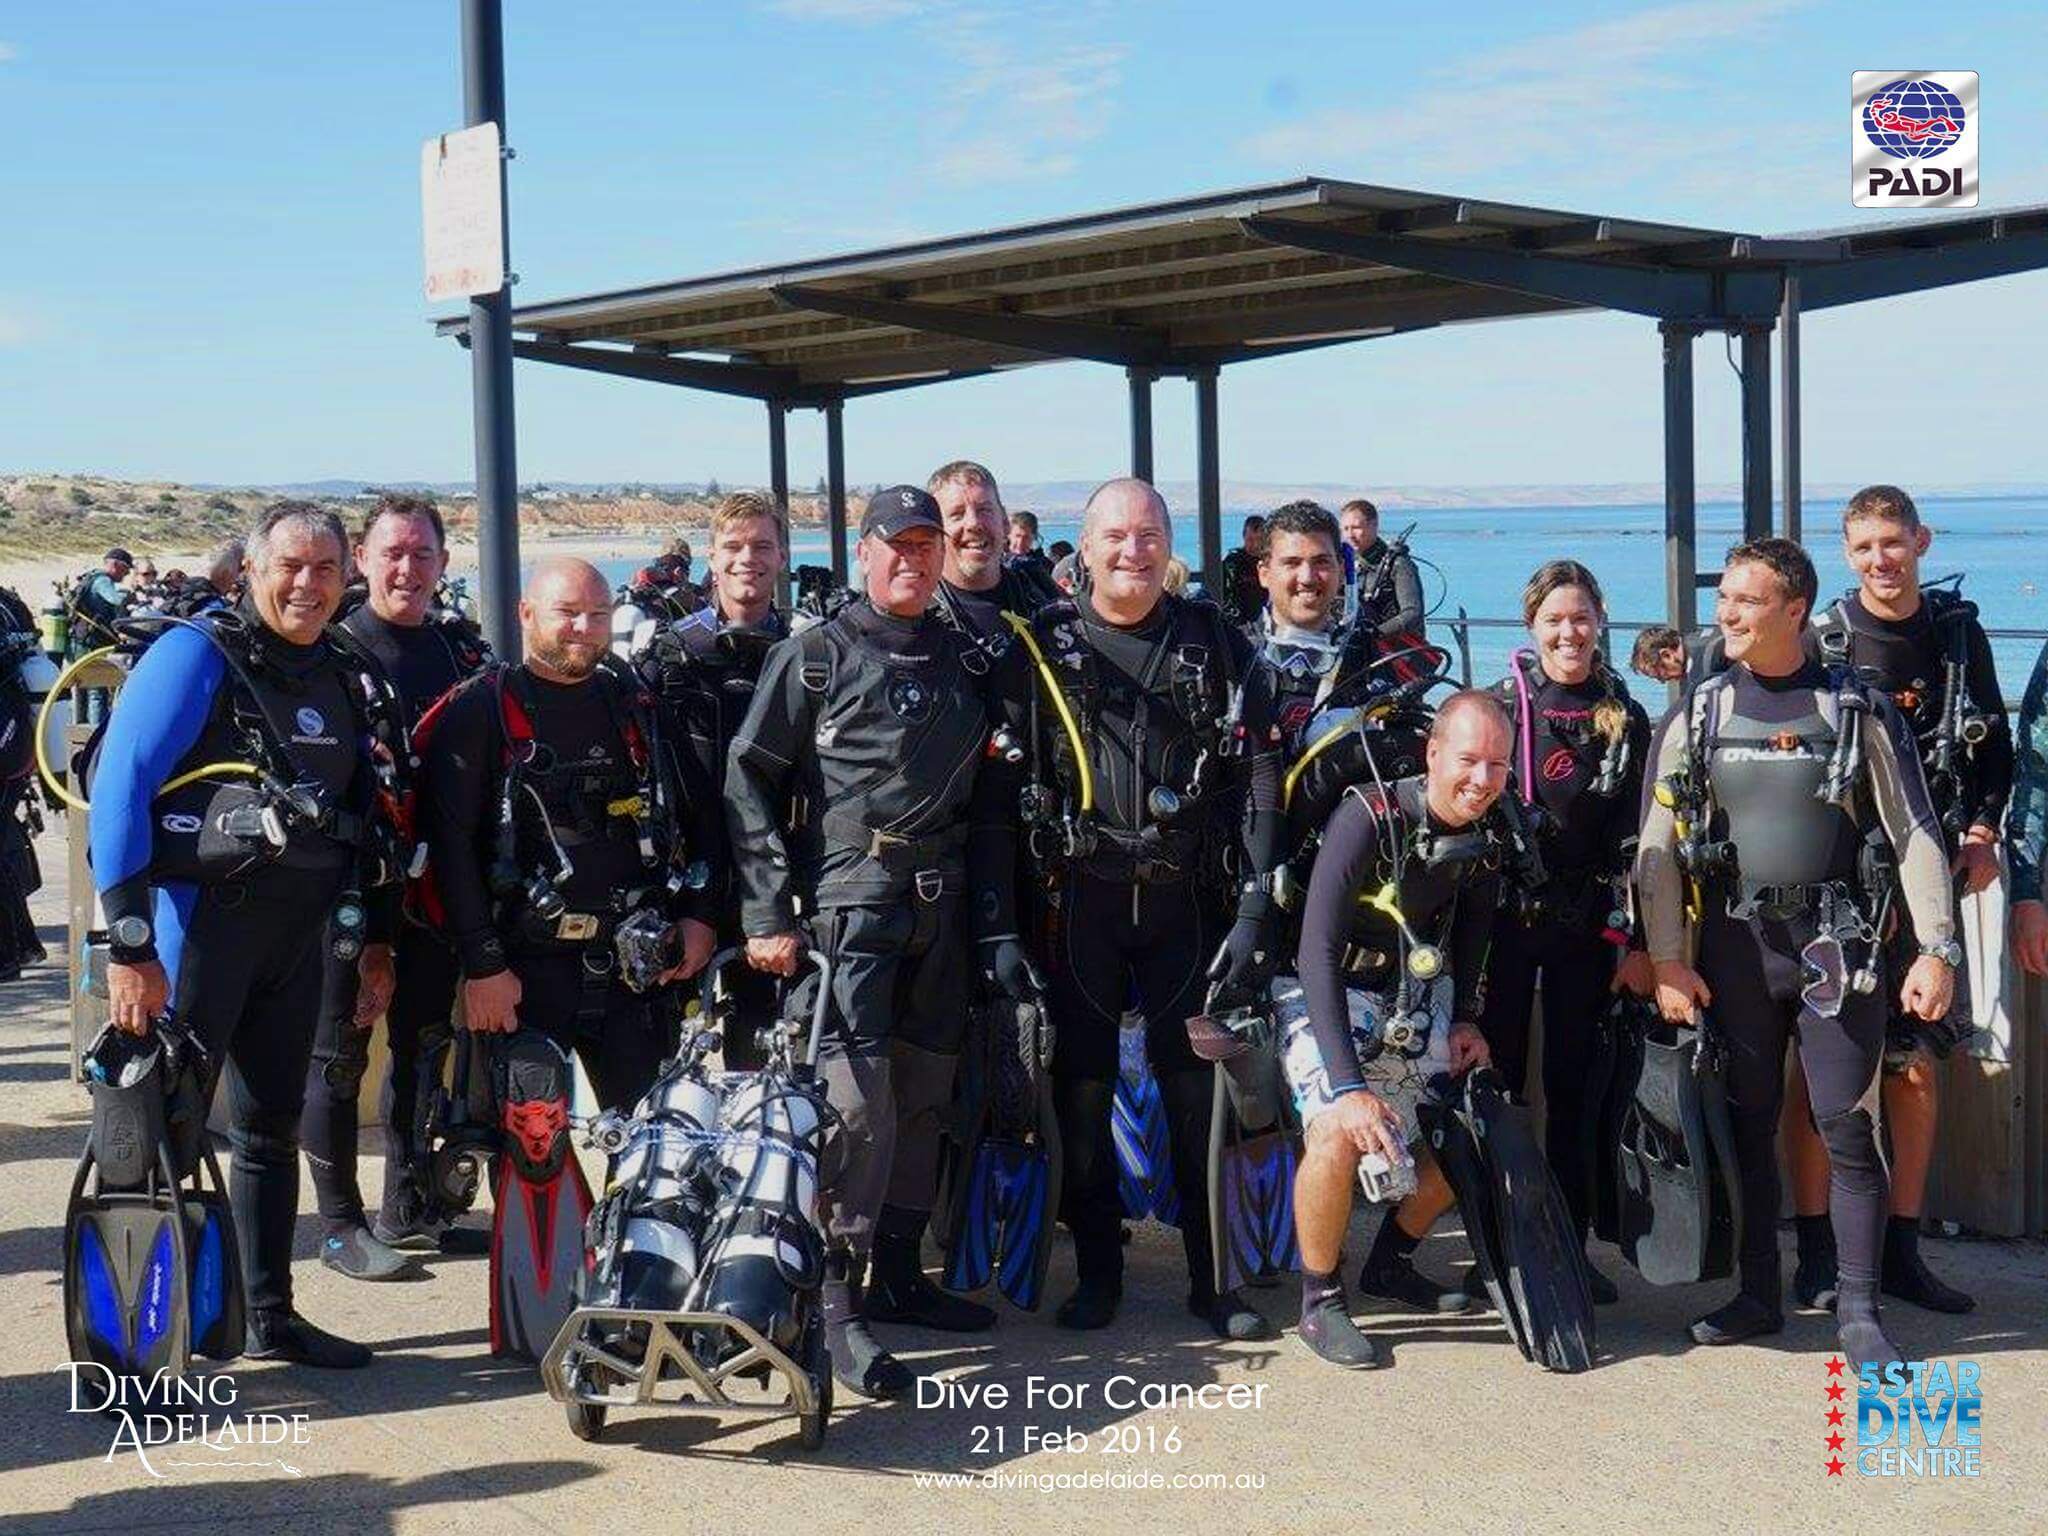 “Diving Adelaide” get behind Dive For Cancer again.